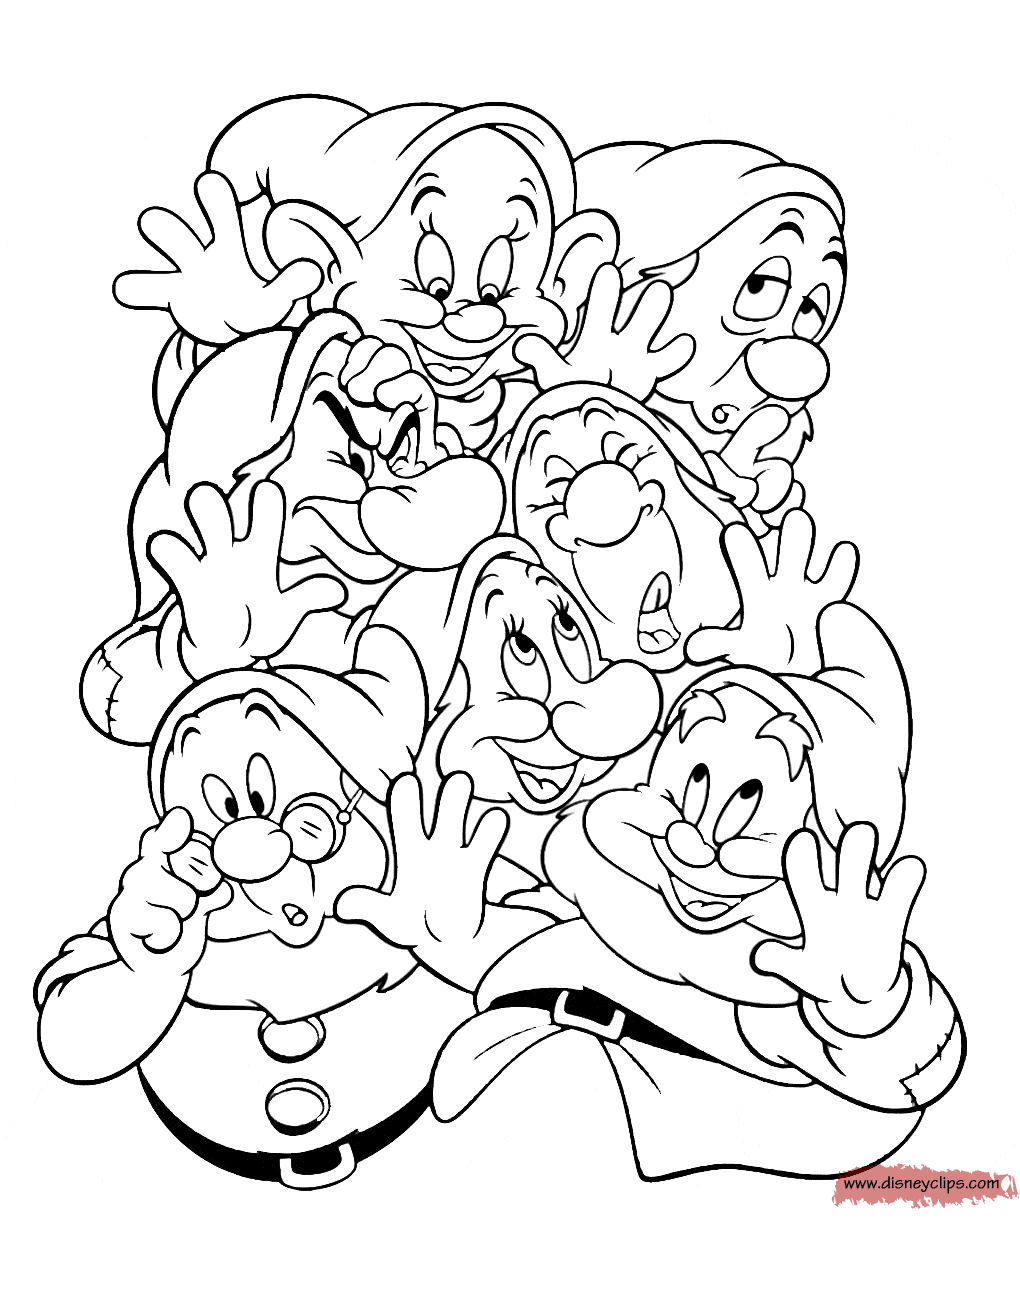 Snow White and the Seven Dwarfs Coloring Pages 5 Disney